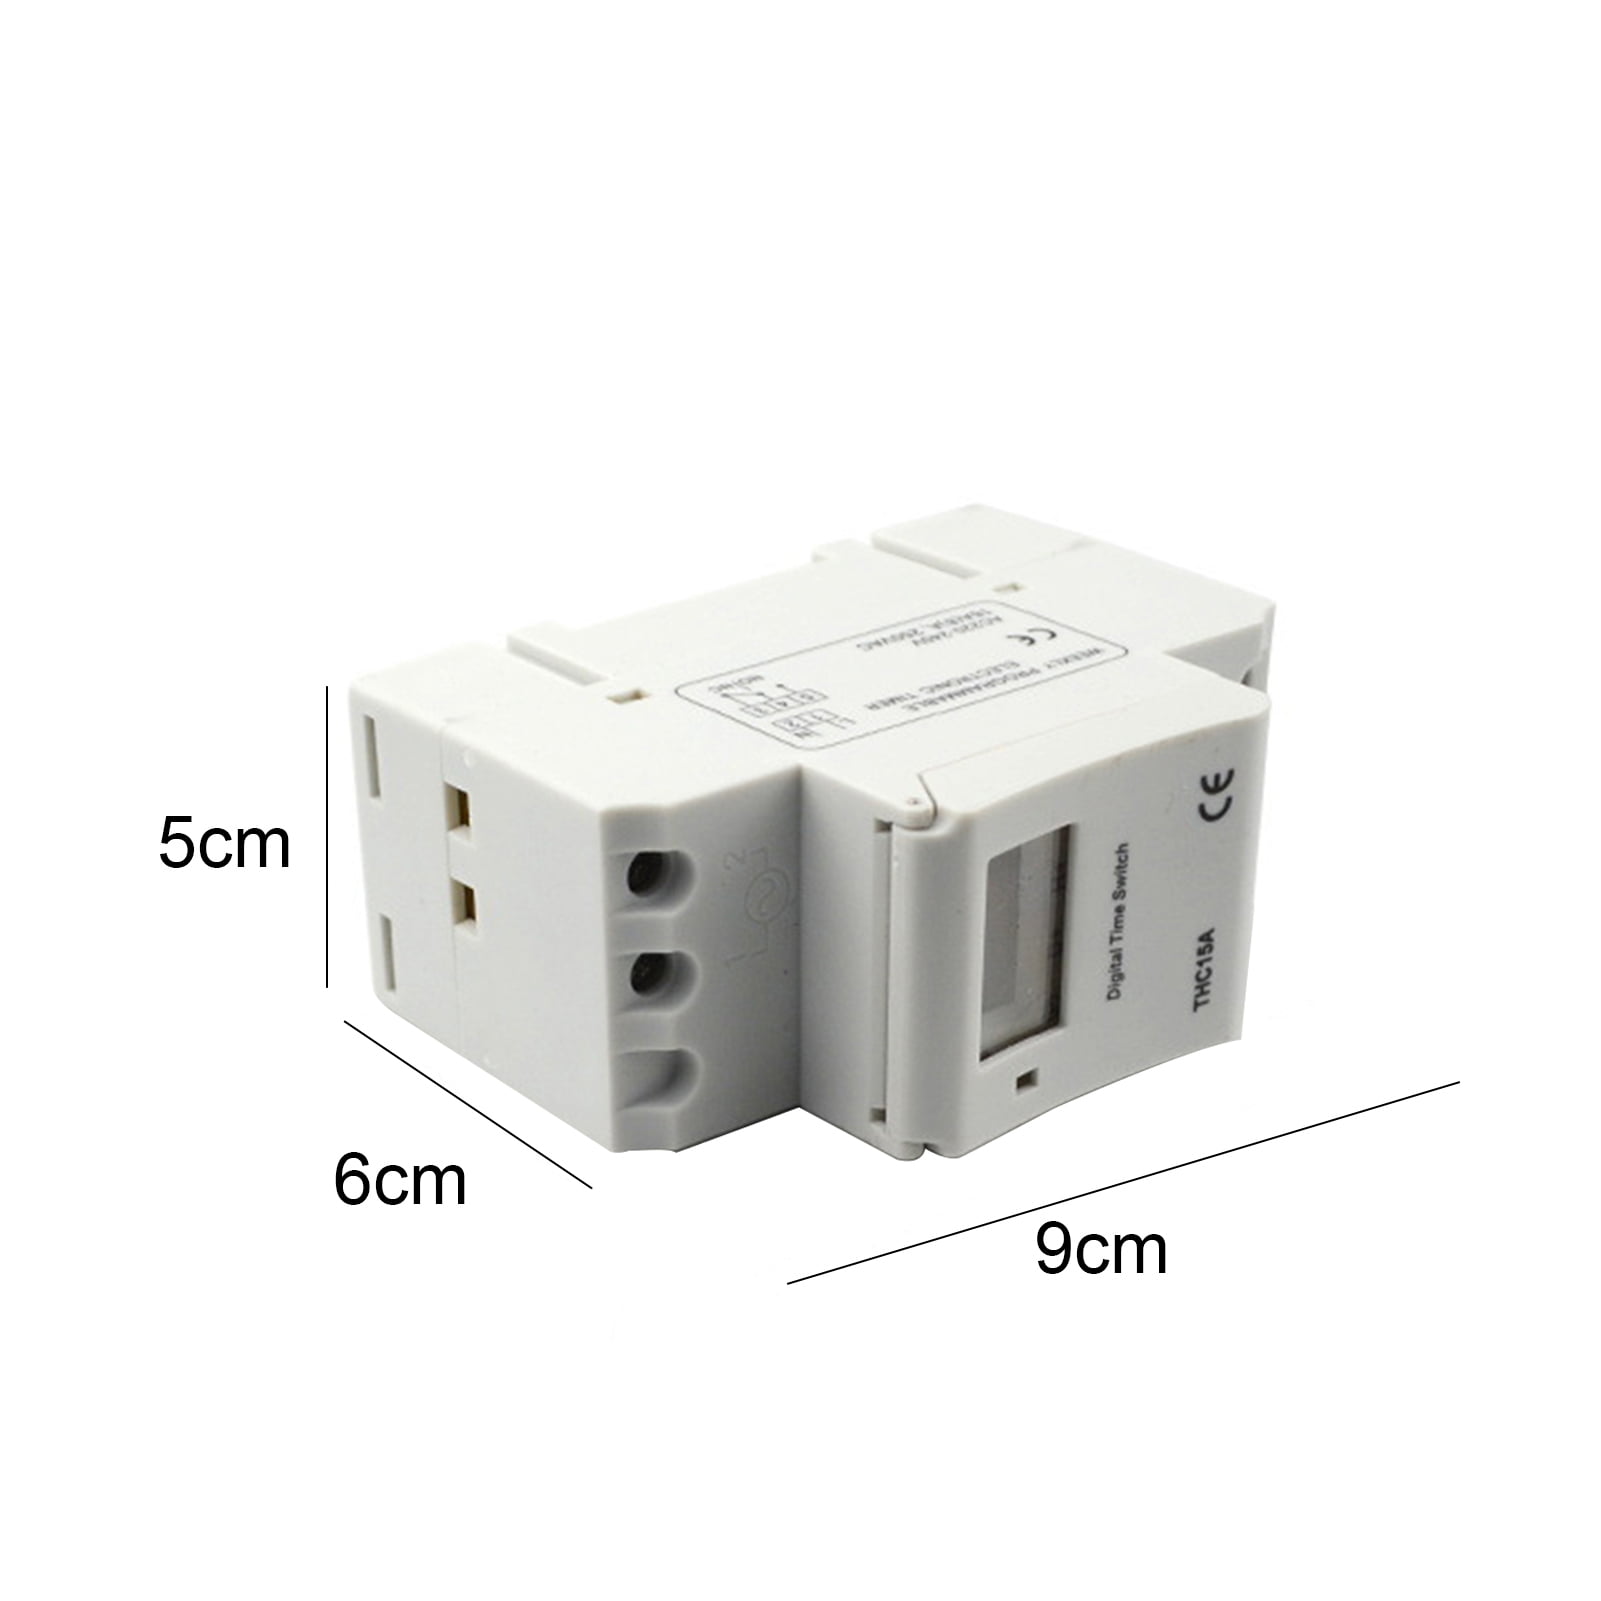 THC15A 12 VOLT DIN RAIL MOUNTED DIGITAL TIMER TIMESWITCH 7 DAY 24 HOUR HEATING 